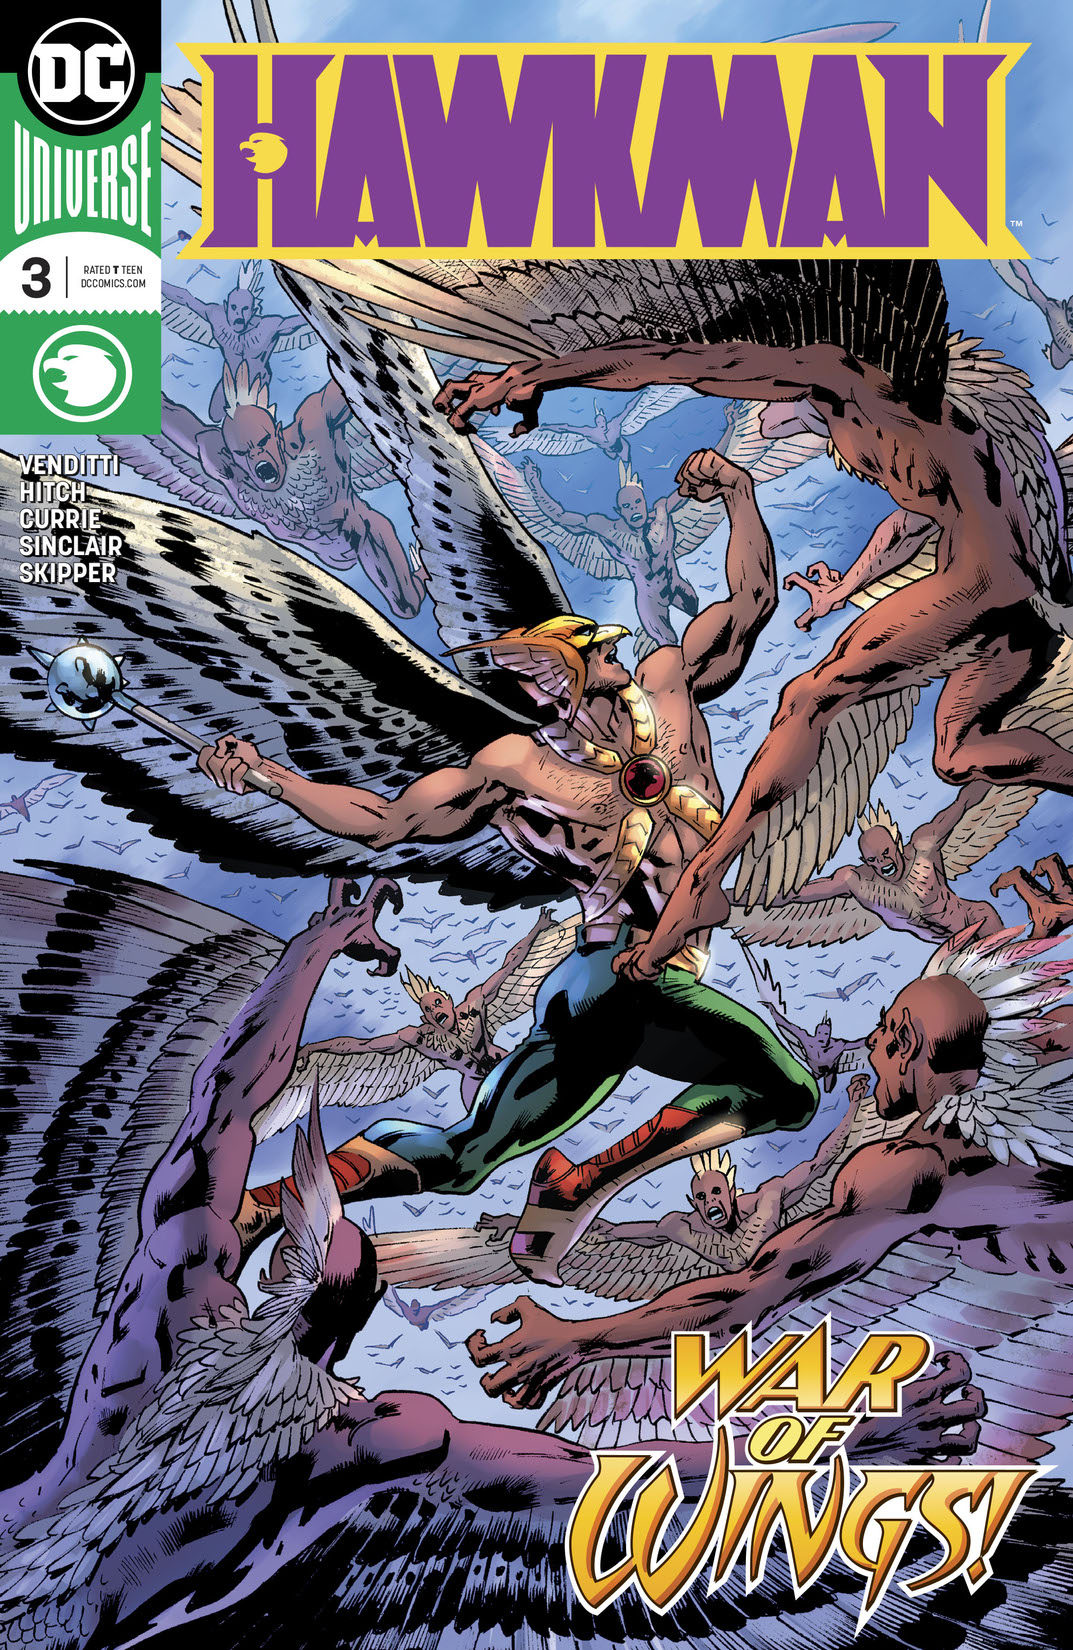 Hawkman (2018-) #3 preview images